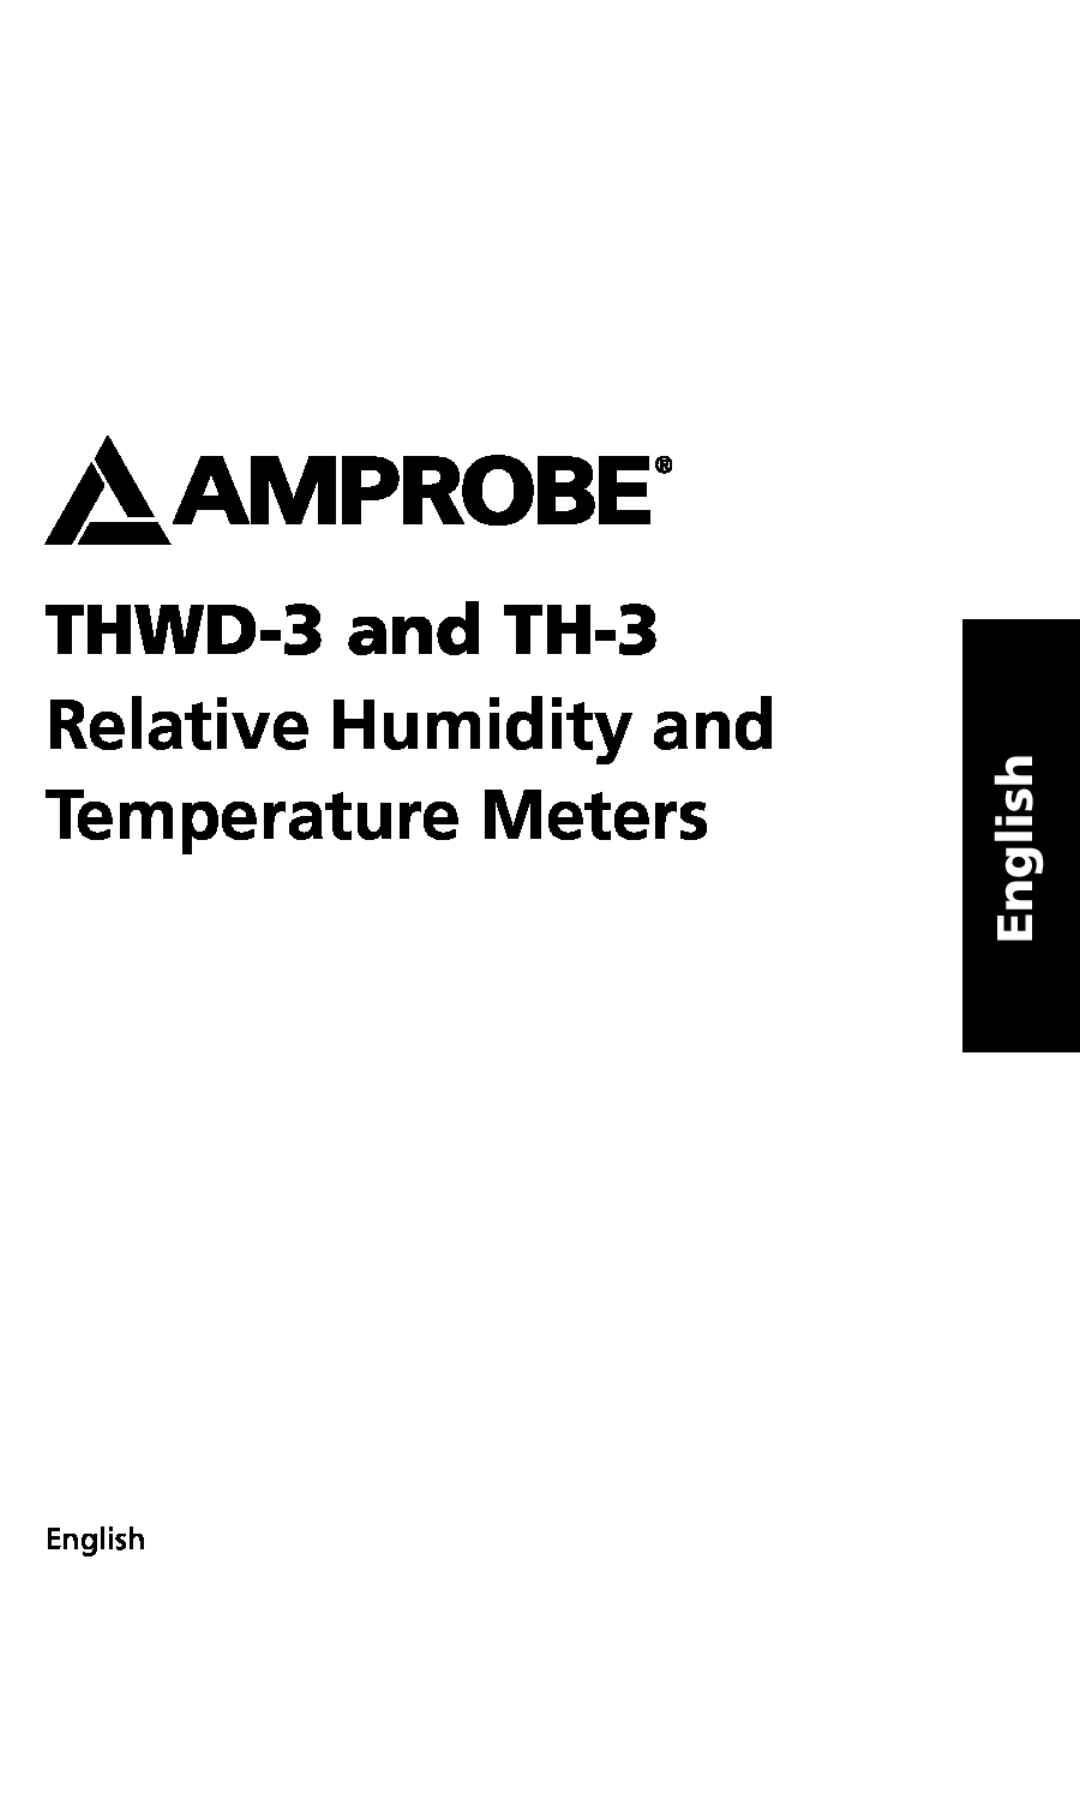 Ampro Corporation user manual THWD-3 and TH-3 Relative Humidity and Temperature Meters, English 